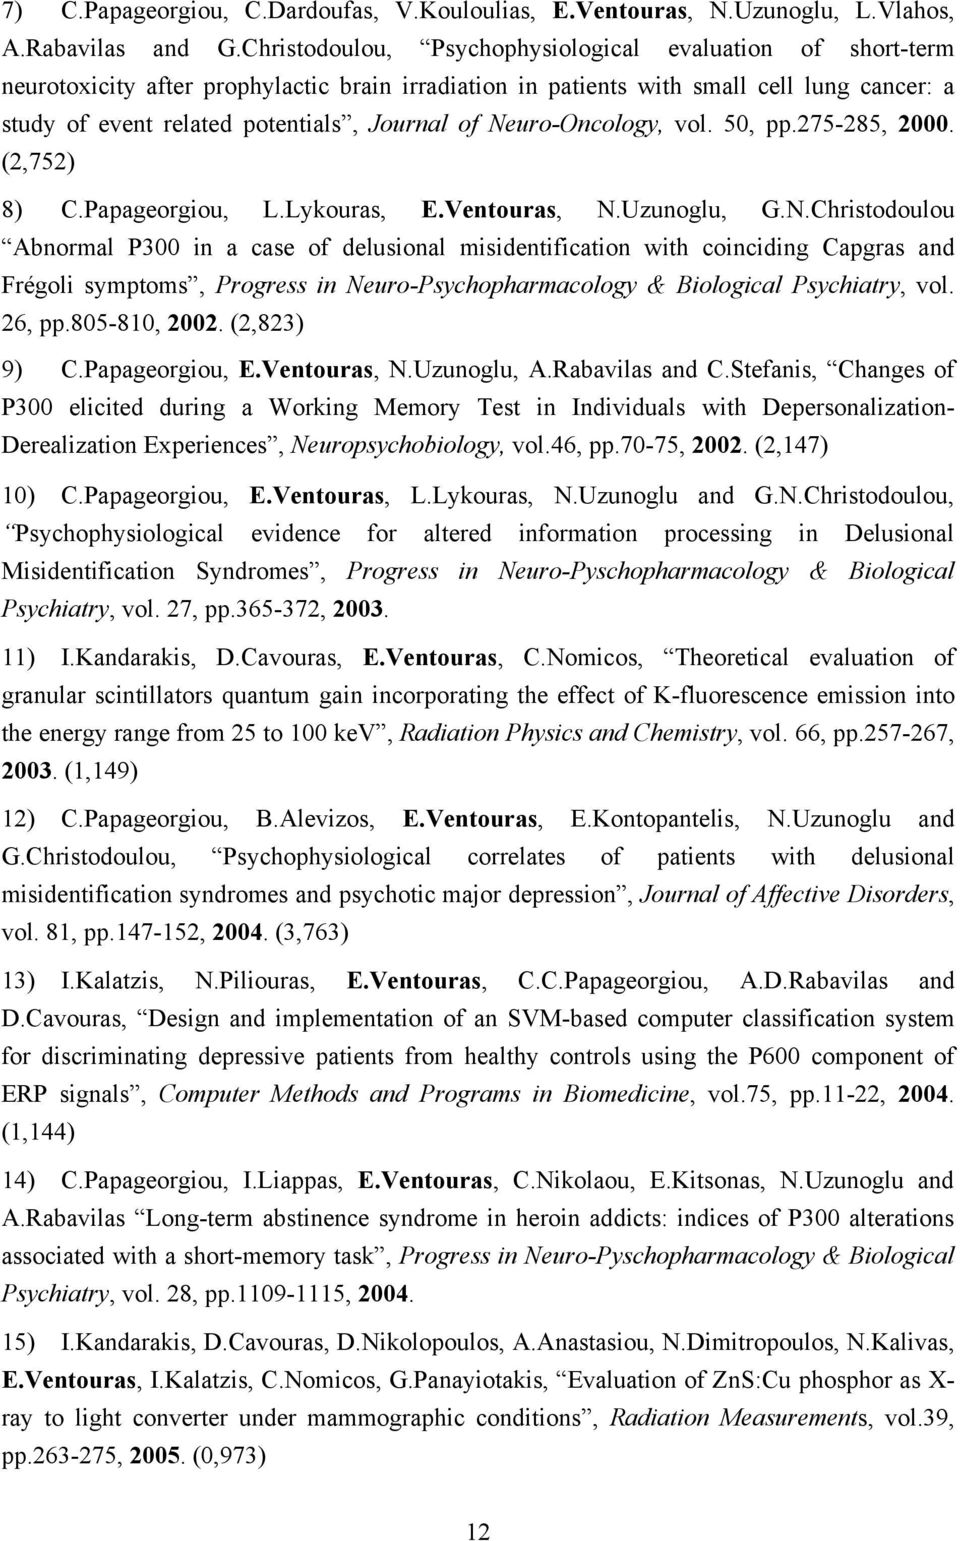 Neuro-Oncology, vol. 50, pp.275-285, 2000. (2,752) 8) C.Papageorgiou, L.Lykouras, E.Ventouras, N.Uzunoglu, G.N.Christodoulou Abnormal P300 in a case of delusional misidentification with coinciding Capgras and Frégoli symptoms, Progress in Neuro-Psychopharmacology & Biological Psychiatry, vol.